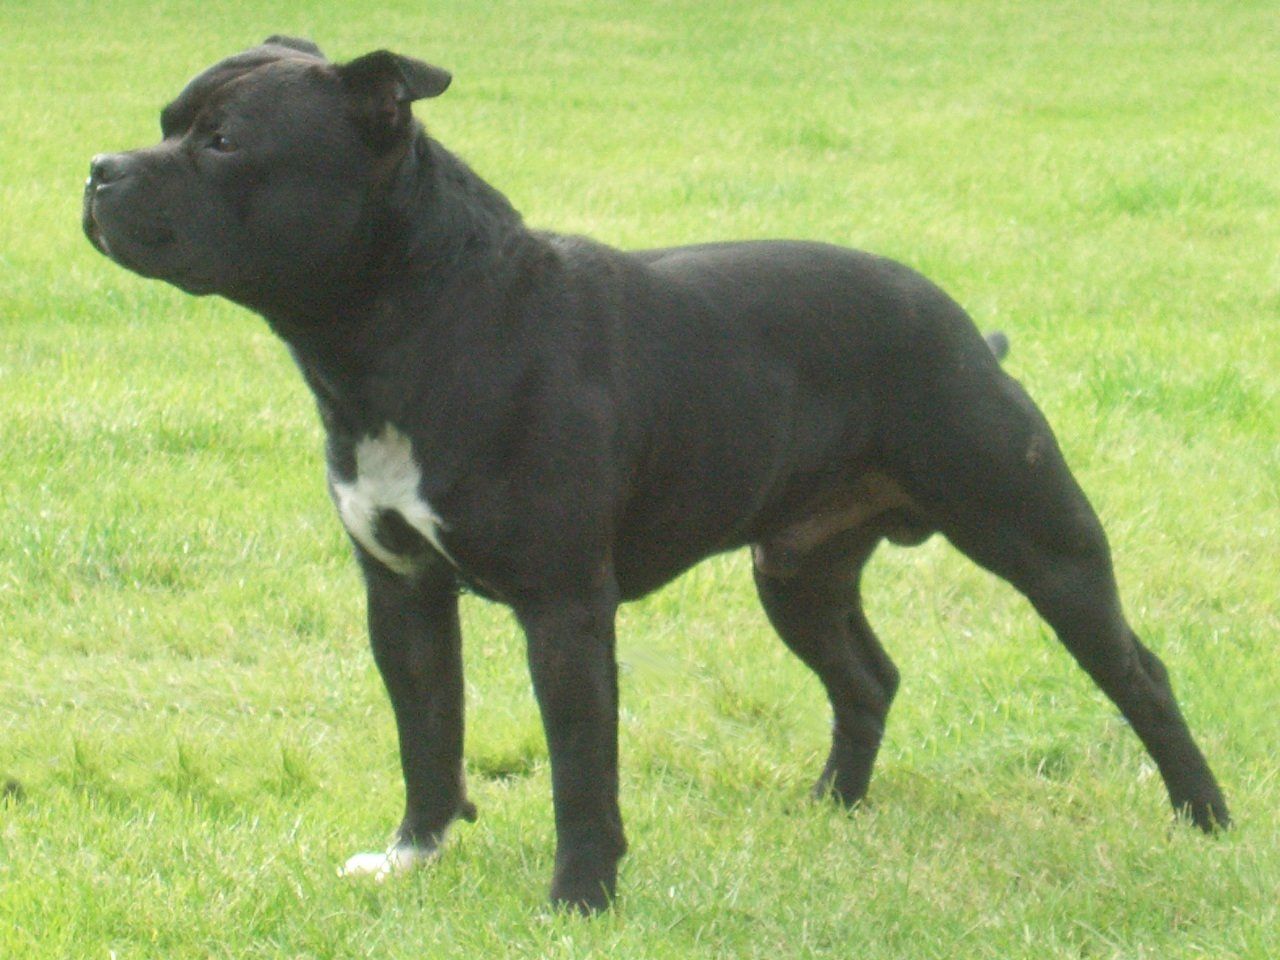 Watching Staffordshire Bull Terrier photo and wallpaper. Beautiful